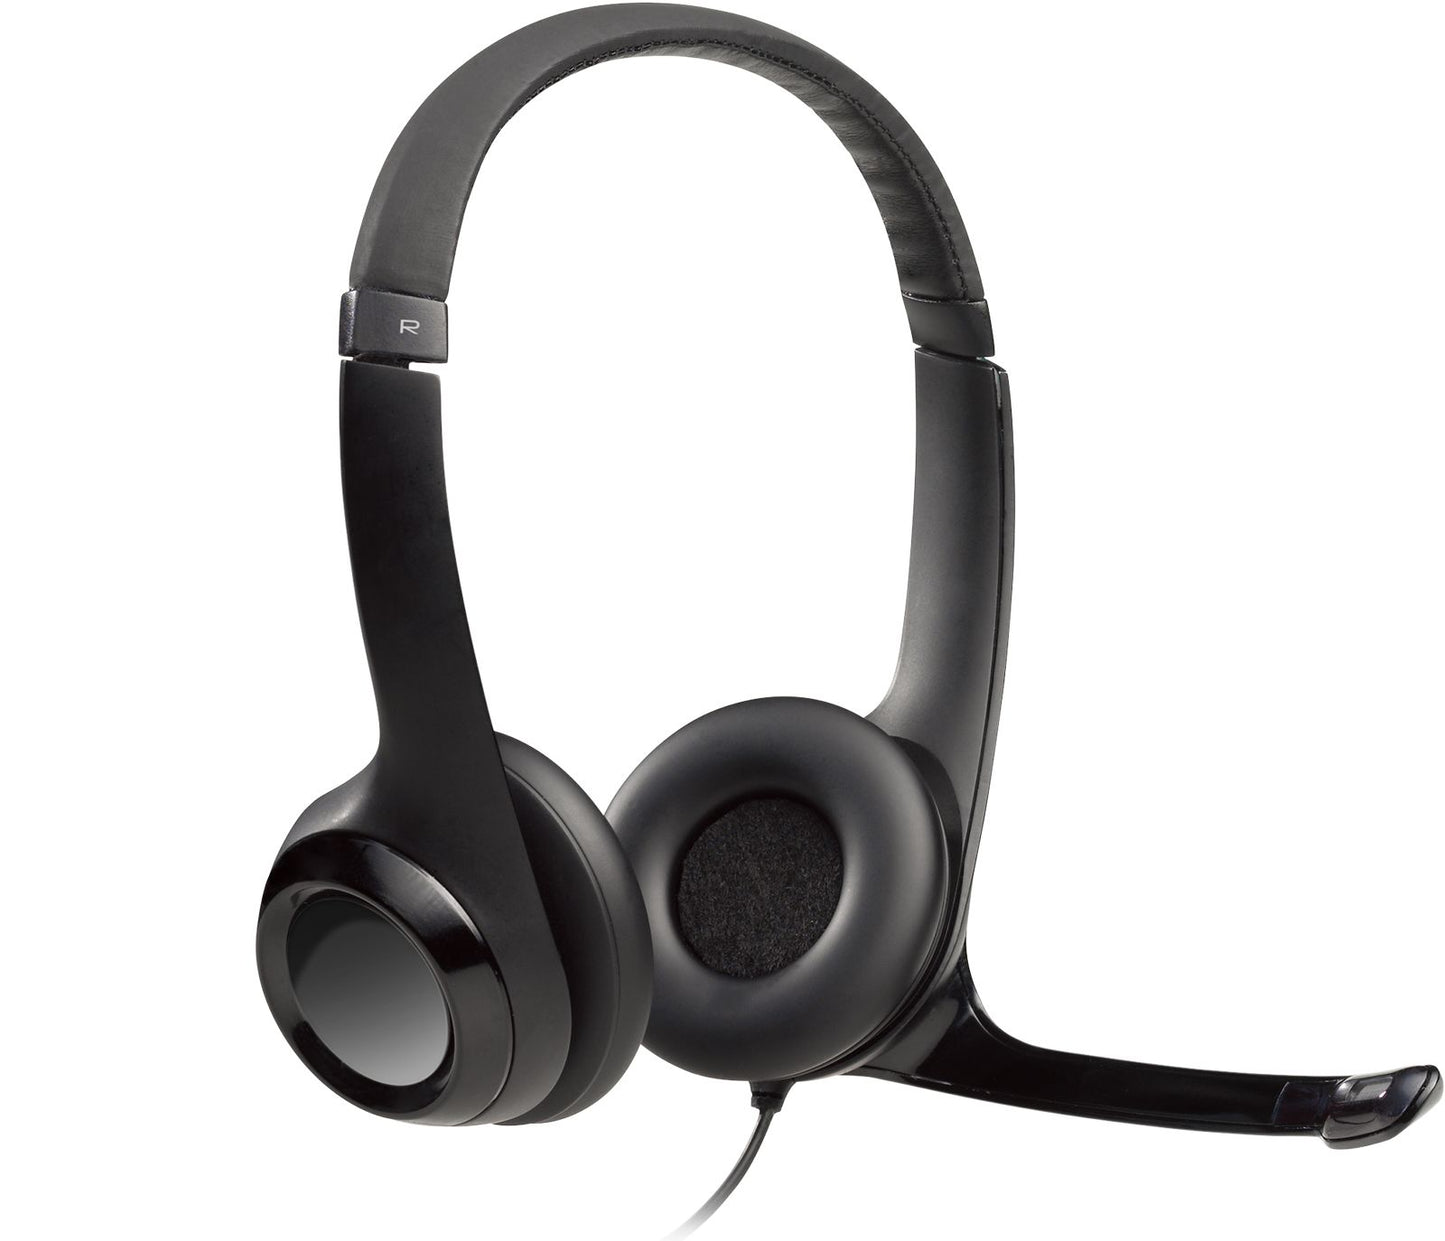 Logitech H390 USB Computer Headset with Noise-Cancelling Mic Enhanced Digital Sound In-Line Controls